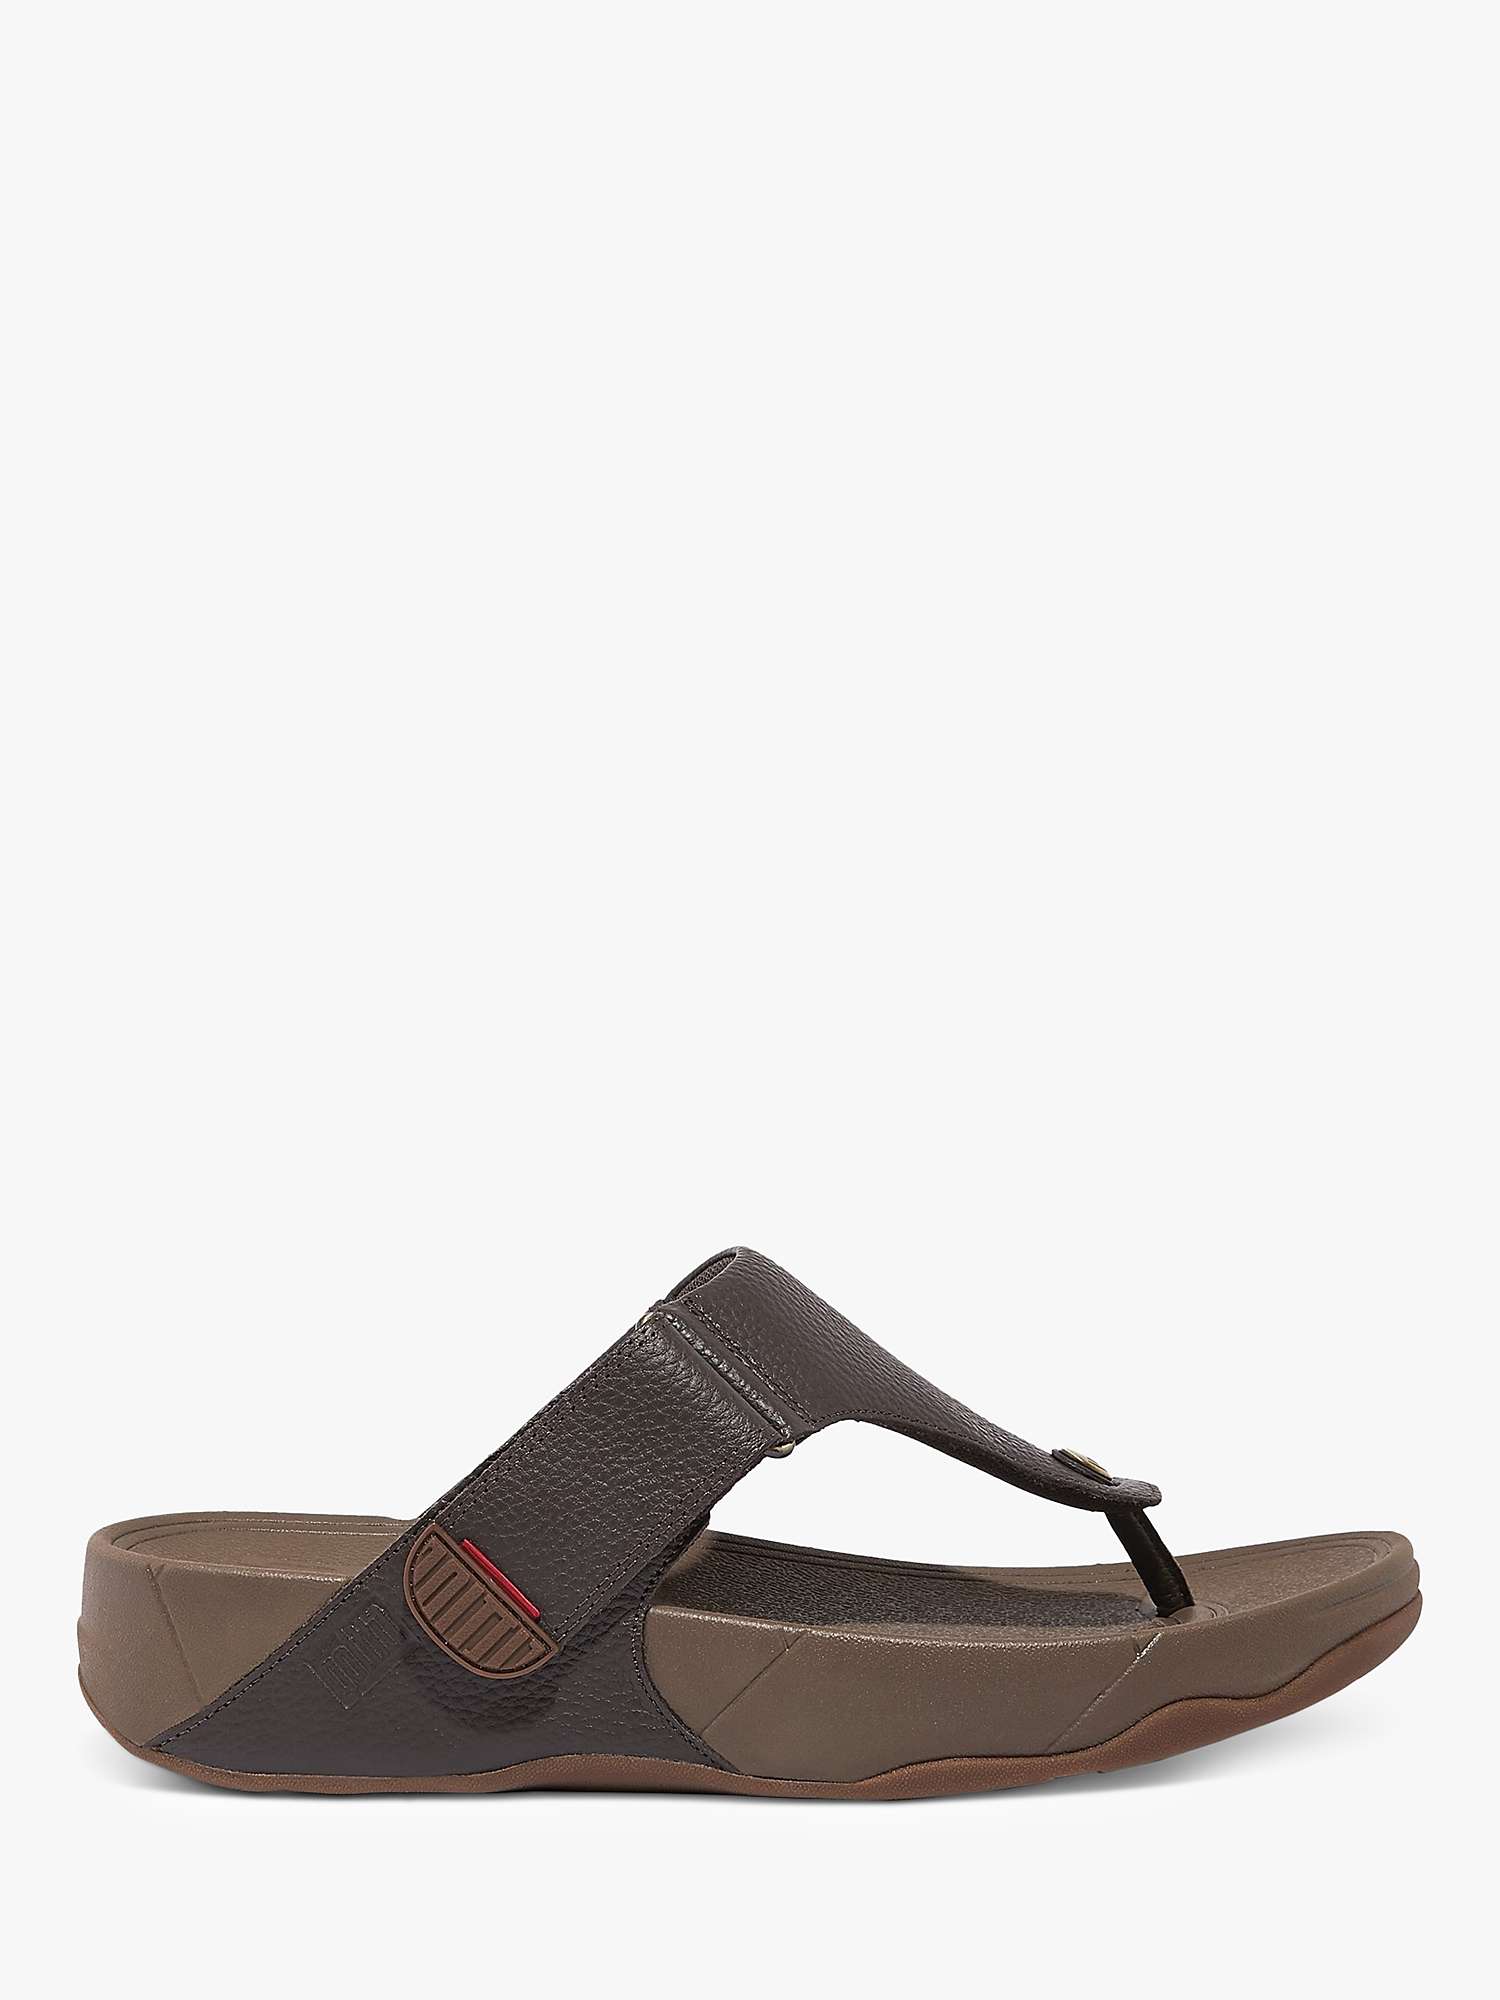 Buy FitFlop Trakk II Leather Sandals, Chocolate Online at johnlewis.com